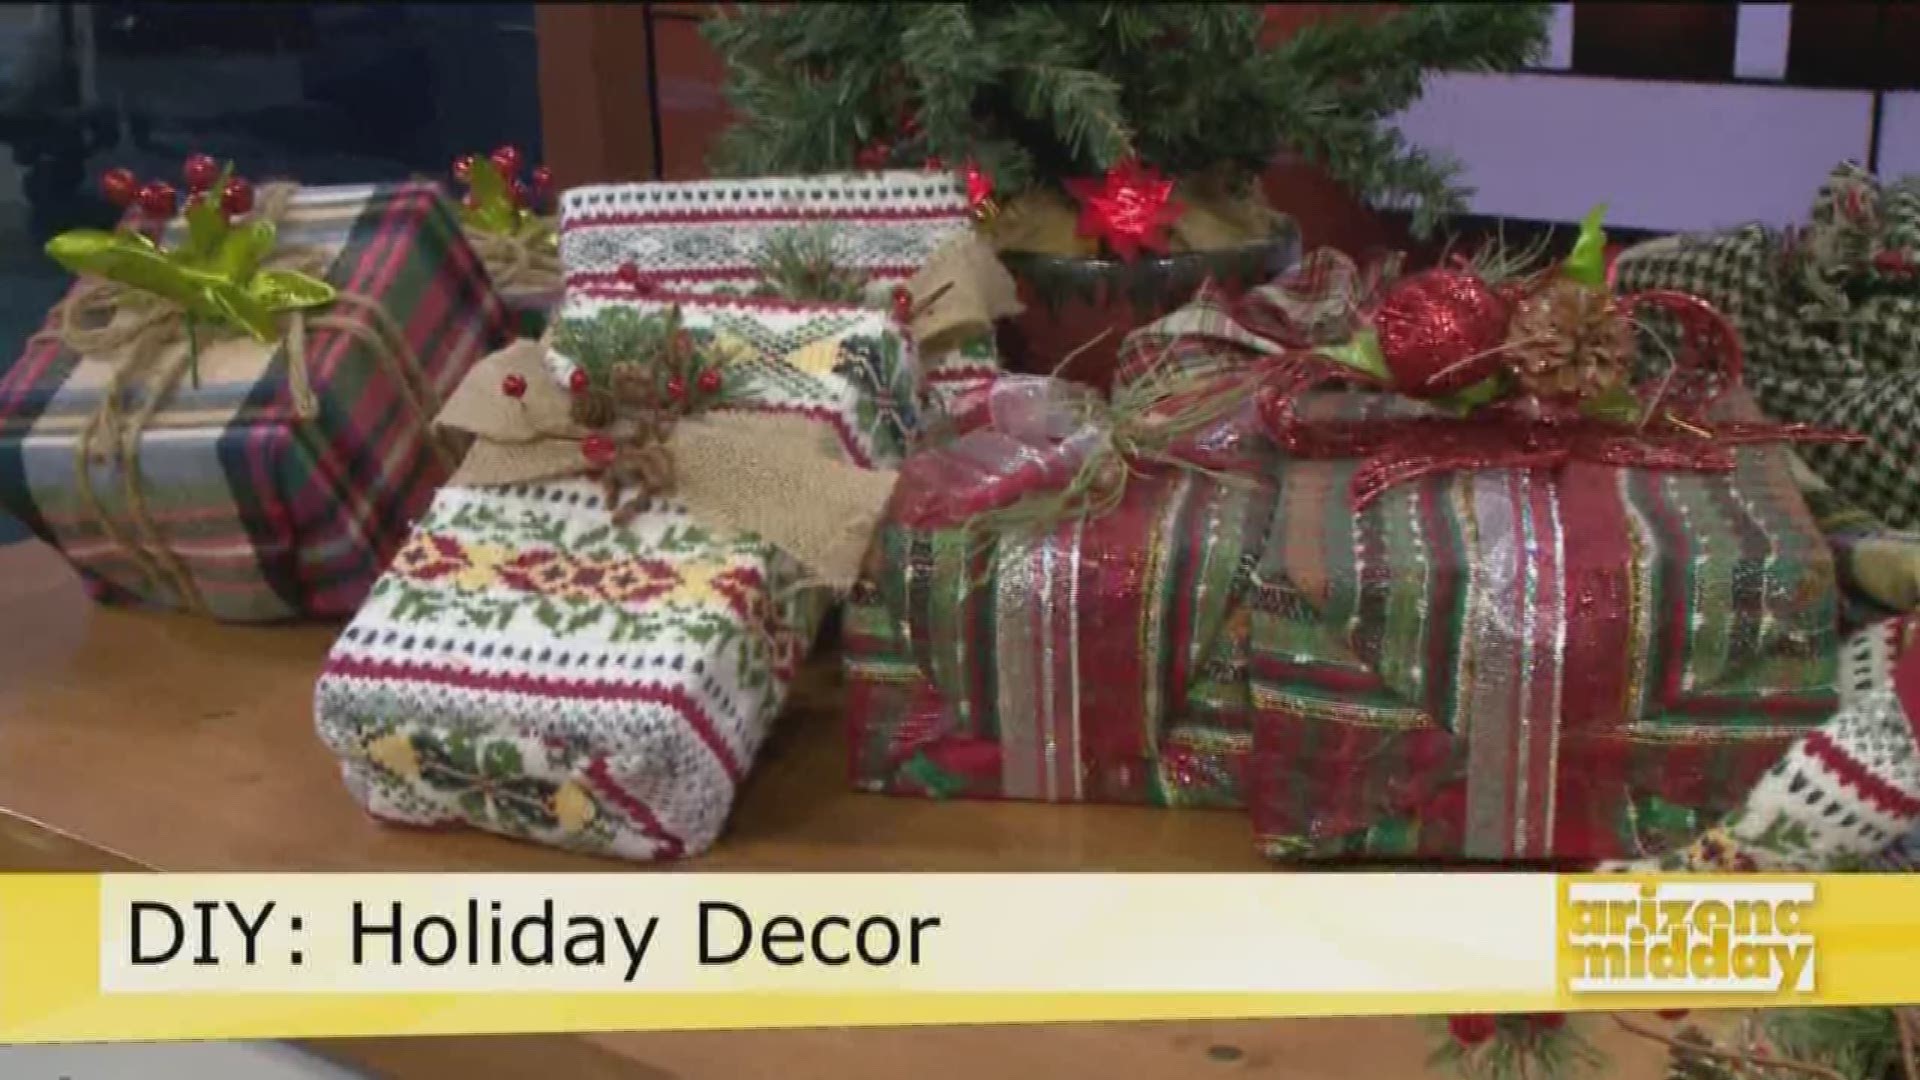 Jan shows us some creative ways to decorate this Christmas with things around your house.